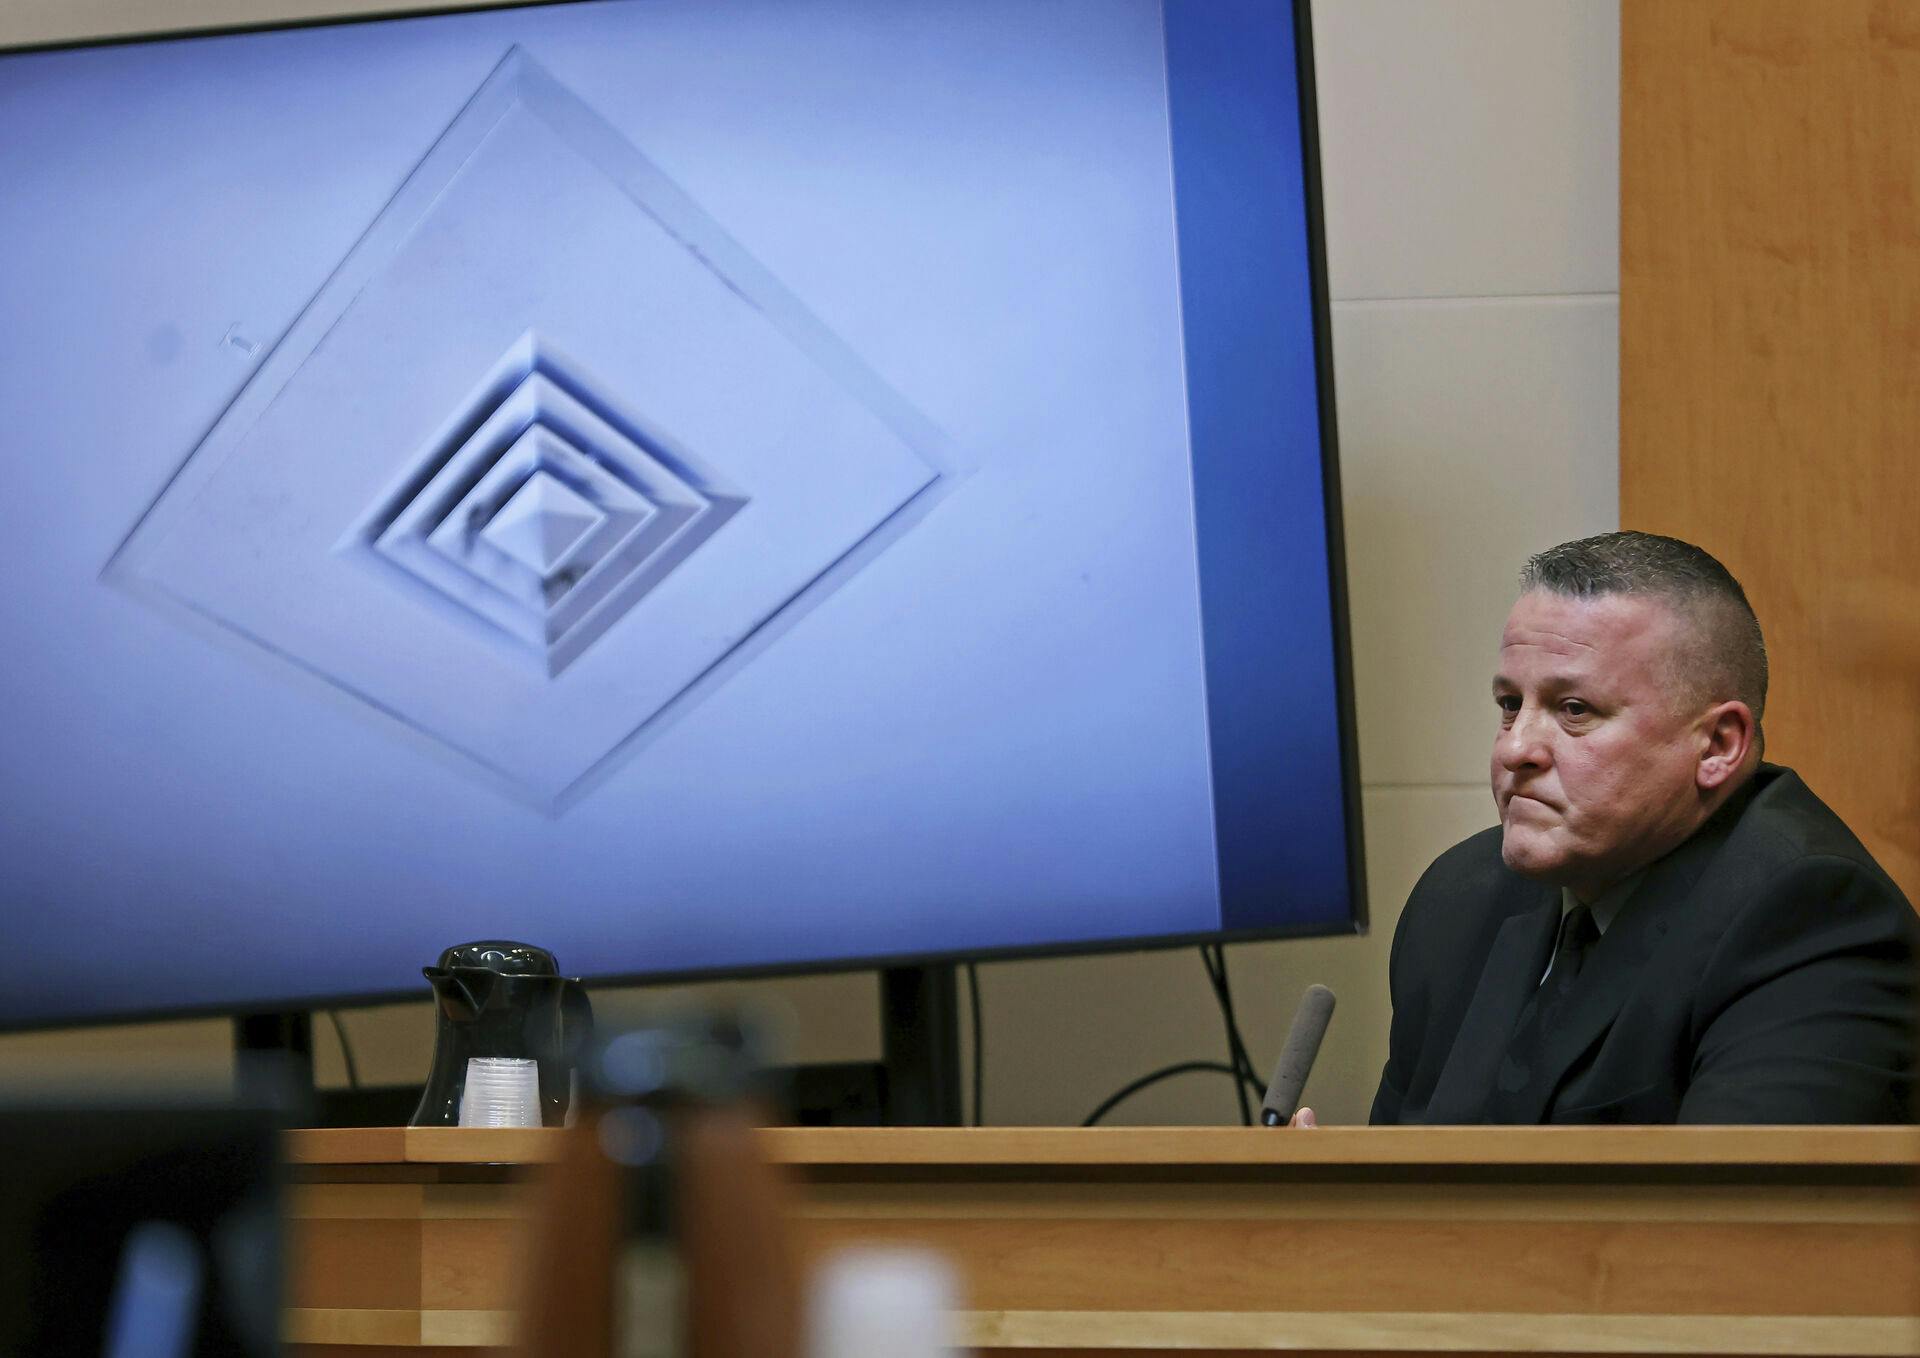 Scott Riley testifies in front of a photo of a vent on the ceiling of Unit 1 at the Families in Transition Shelter at the trial of Adam Montgomery who is charged with murdering his five-year-old daughter Harmony, at the Hillsborough County Superior Court Wednesday, Feb. 14, 2024, in Manchester, N.H. Riley investigated the crime as a member of the Manchester Police Department. (Jim Davis/The Boston Globe via AP, Pool)